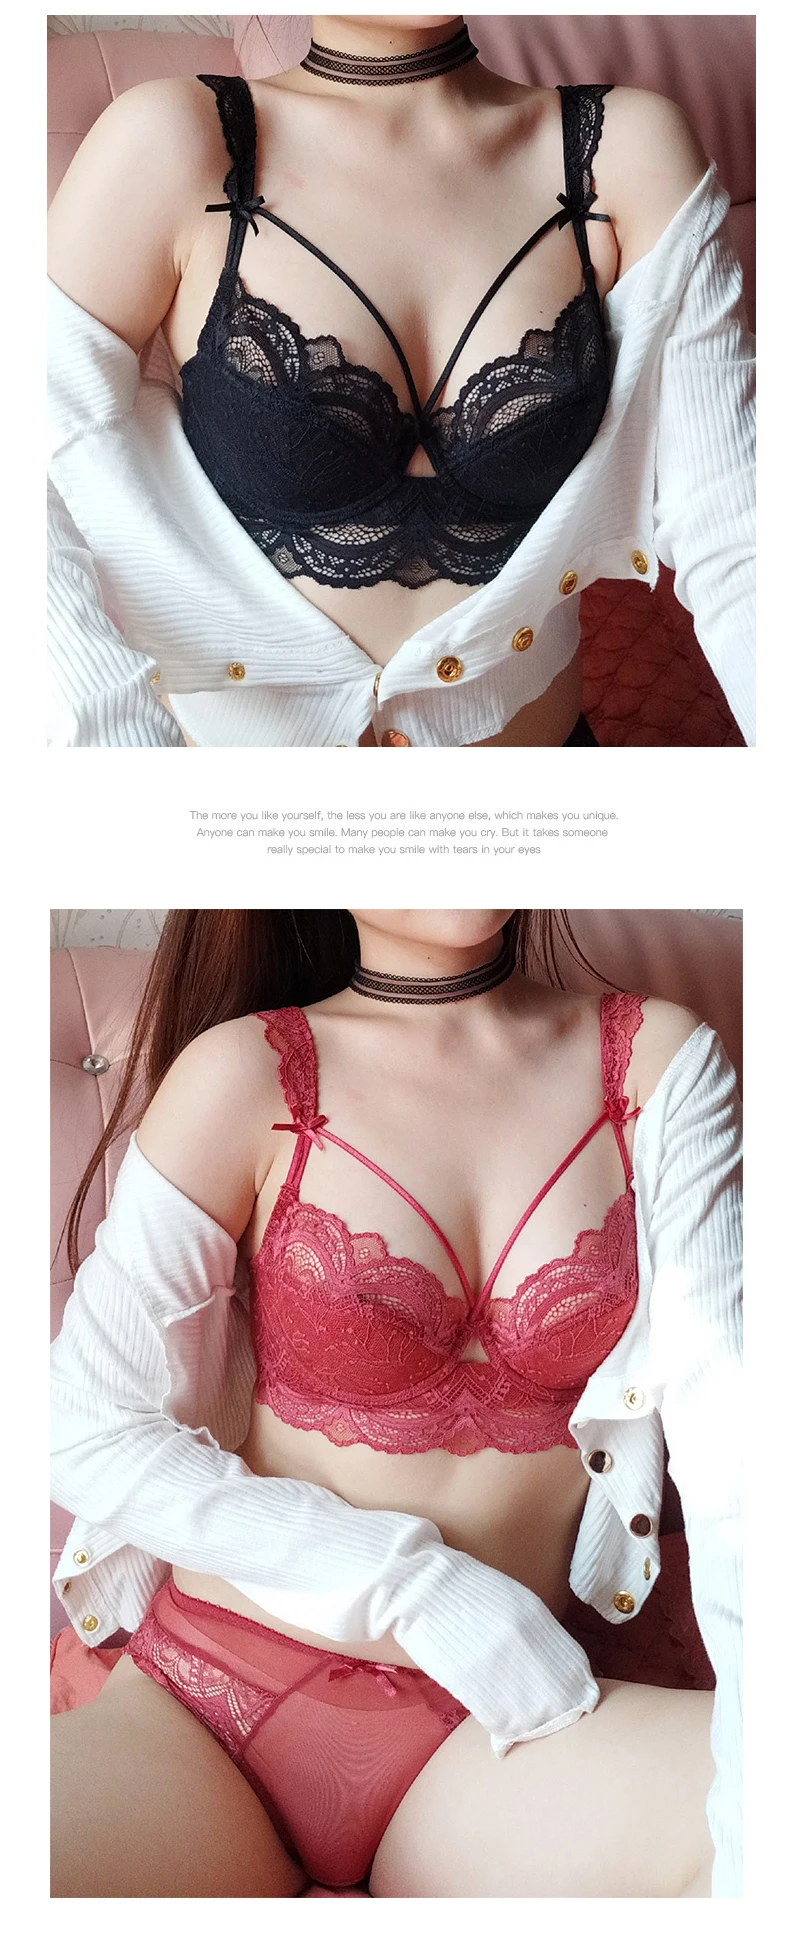 lace bra set Ultra-thin underwear set new T-shirt push-up bra and panties hollow bra plus size sexy bra lace underwear set ABCDE cup 95C 95D lace bra and panty sets